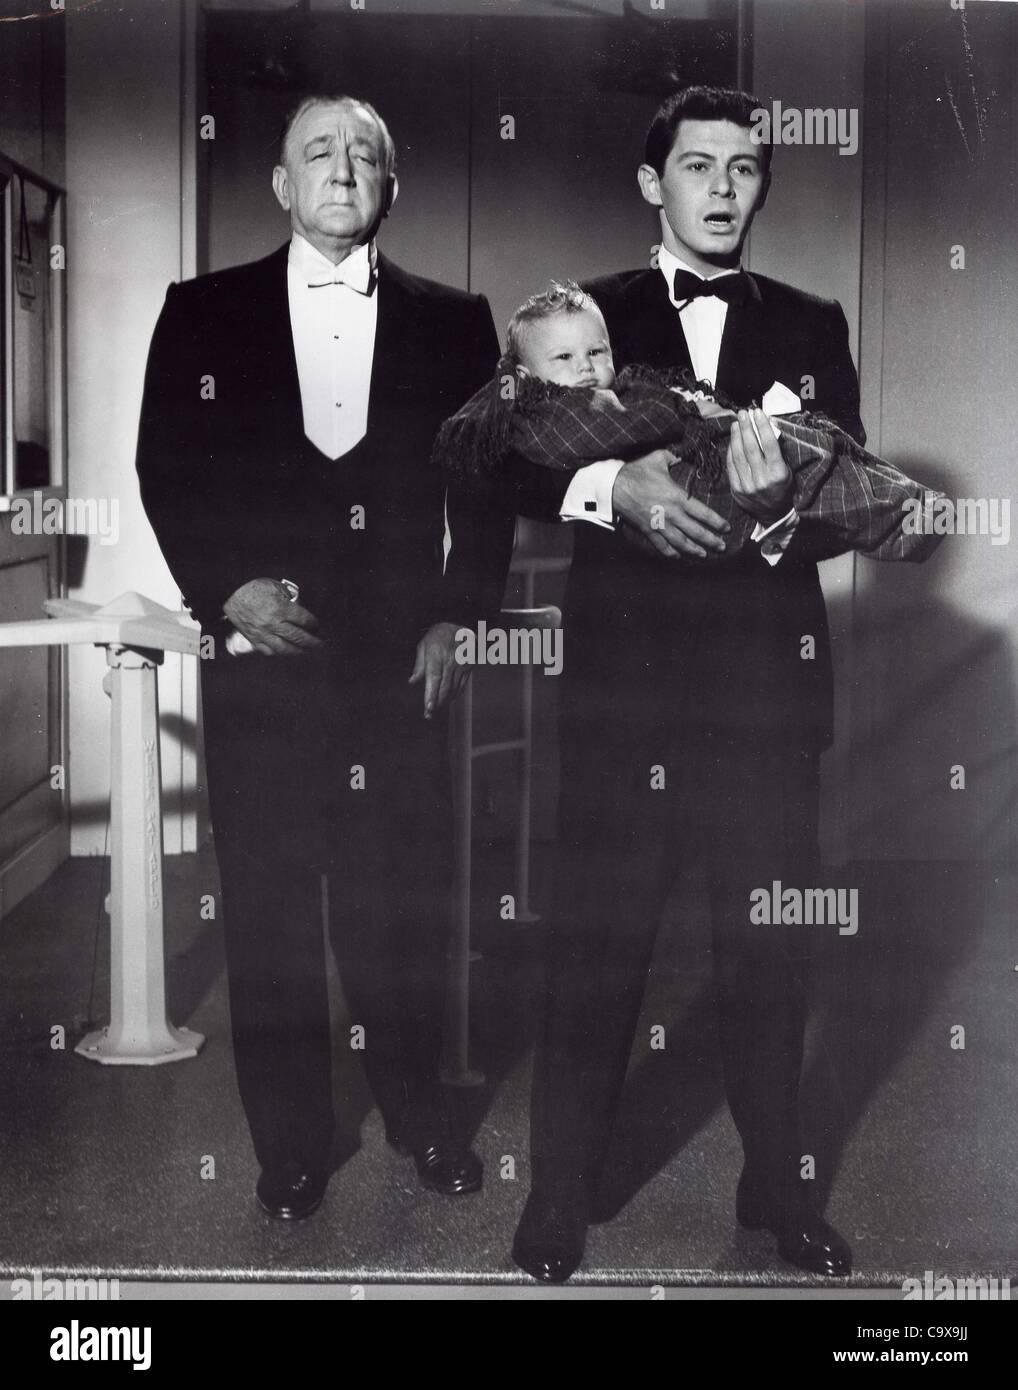 EDDIE FISHER with baby Donald Gray and butler Melville Cooper.Supplied by   Photos, inc..Bundle of Joy 1956.(Credit Image: Â© Supplied By Globe Photos, Inc/Globe Photos/ZUMAPRESS.com) Stock Photo